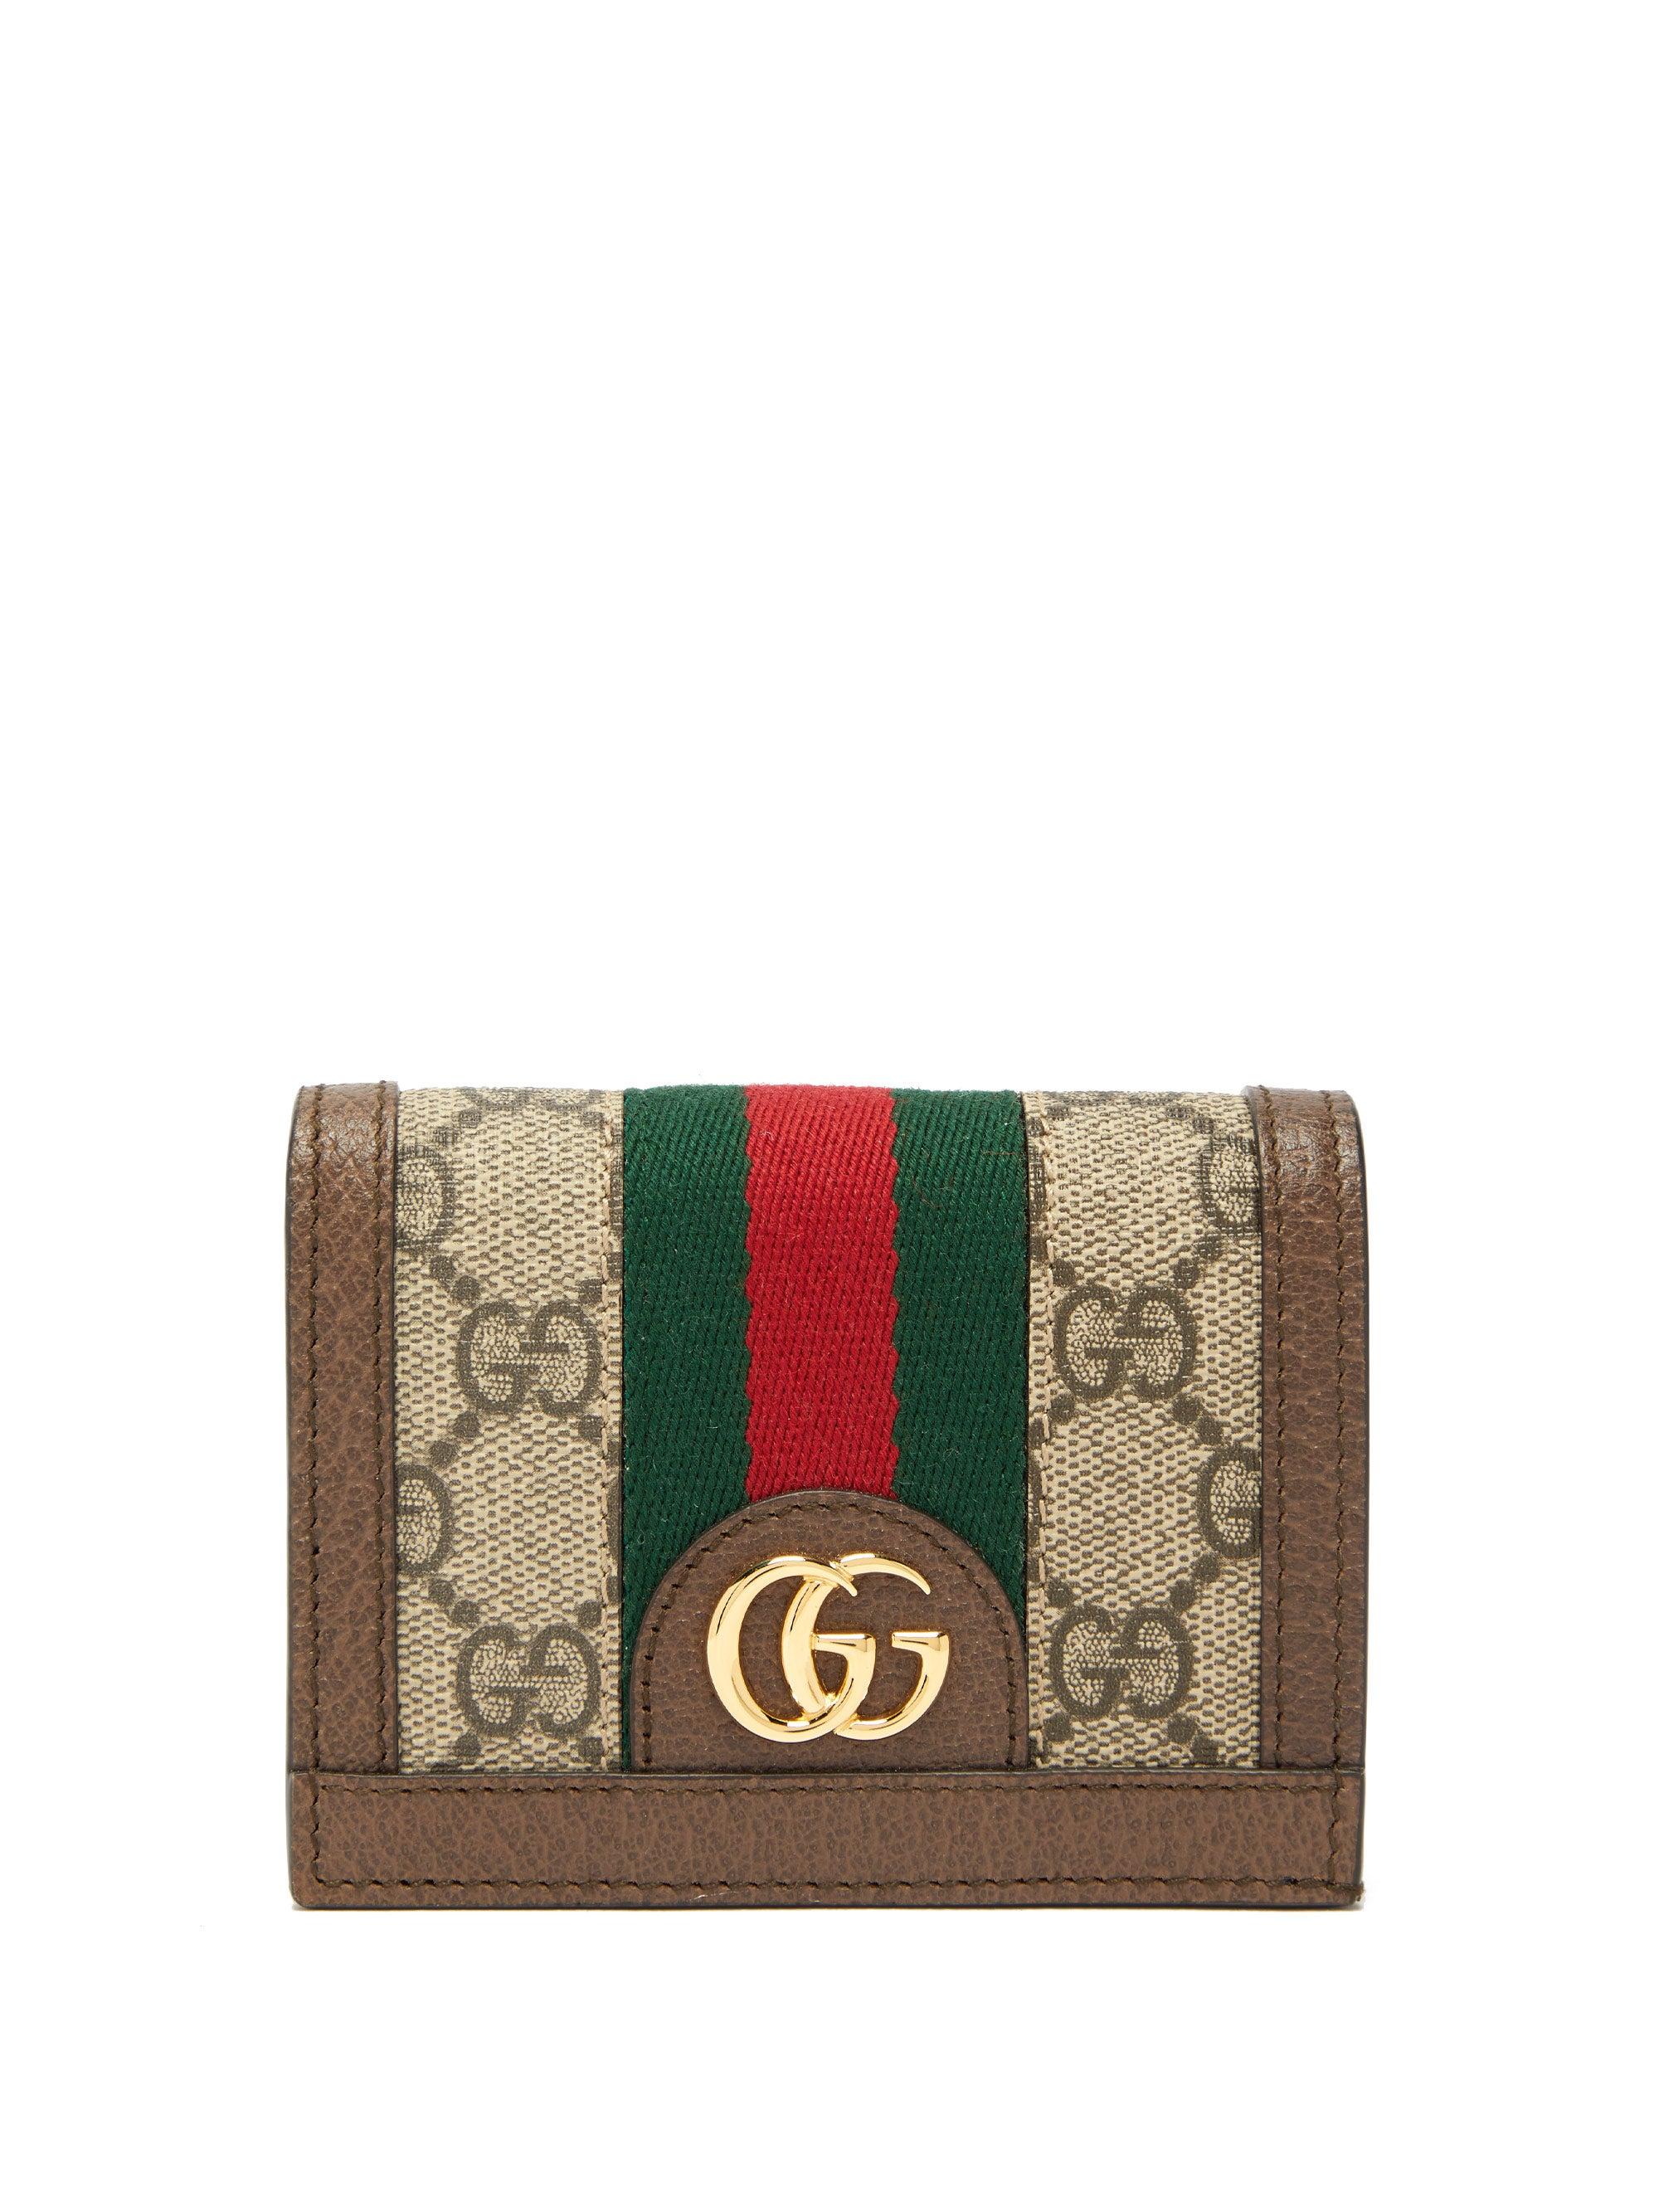 Gucci Ophidia Gg Supreme Web-stripe Canvas Wallet in Gray - Lyst